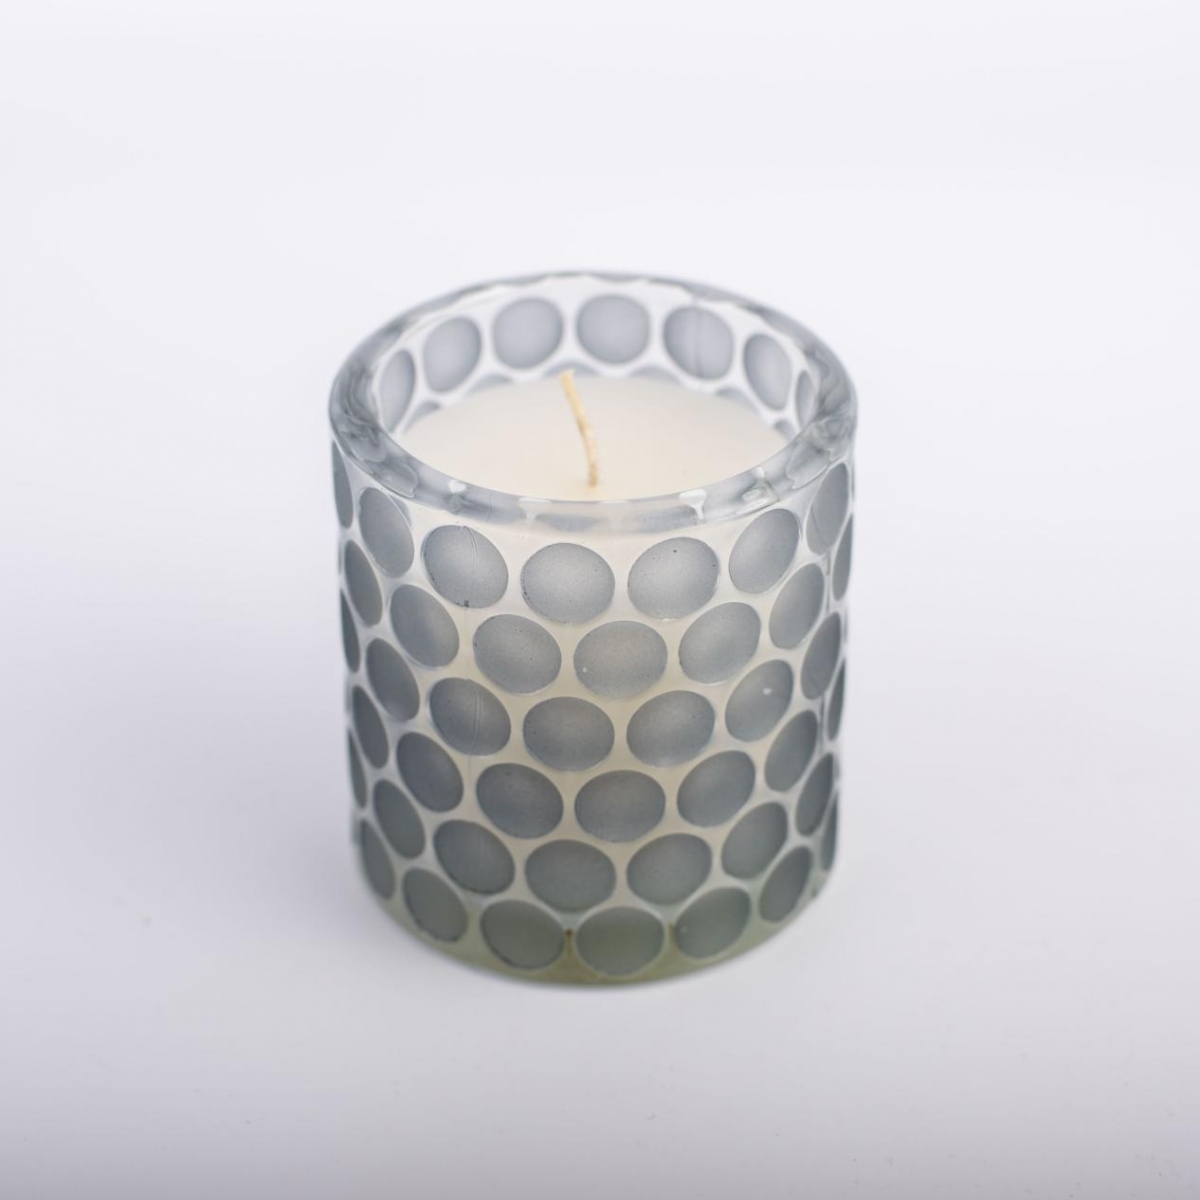 Scented Candles-Best Soy Wax ,Essential Oil Candles ,Polish Honeycomb Embossed Candle Jar ,China Factory ,Price-HOWCANDLE-Candles,Scented Candles,Aromatherapy Candles,Soy Candles,Vegan Candles,Jar Candles,Pillar Candles,Candle Gift Sets,Essential Oils,Reed Diffuser,Candle Holder,